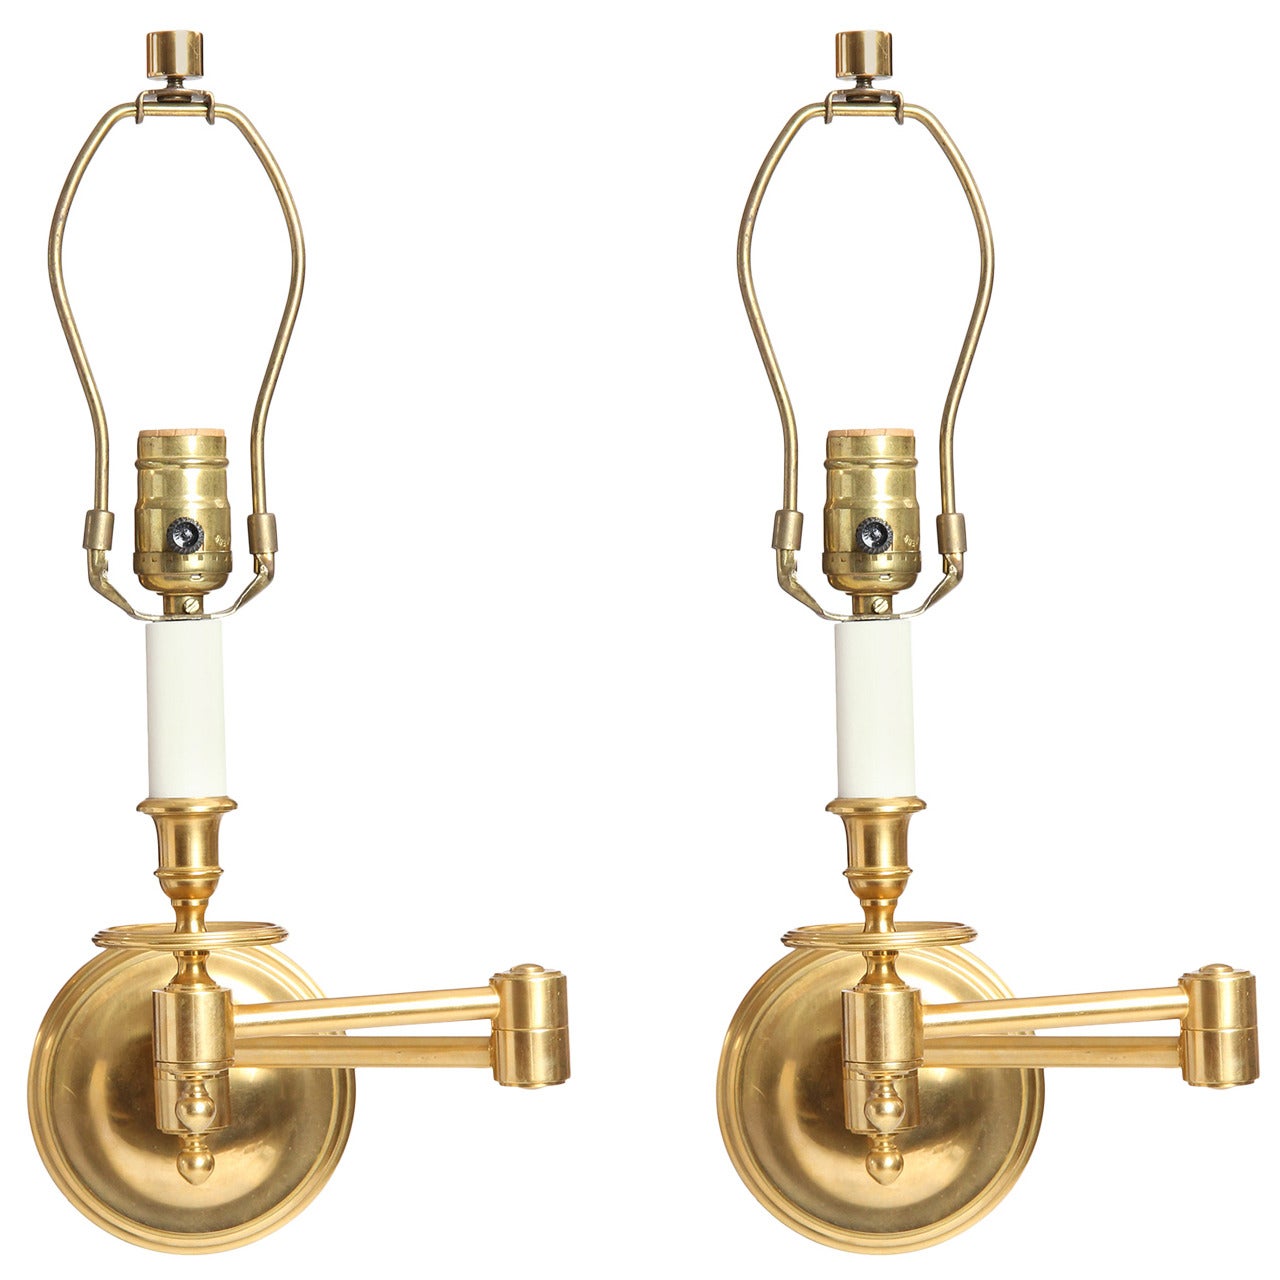 A Pair of Brass Swing Arm Wall Sconces